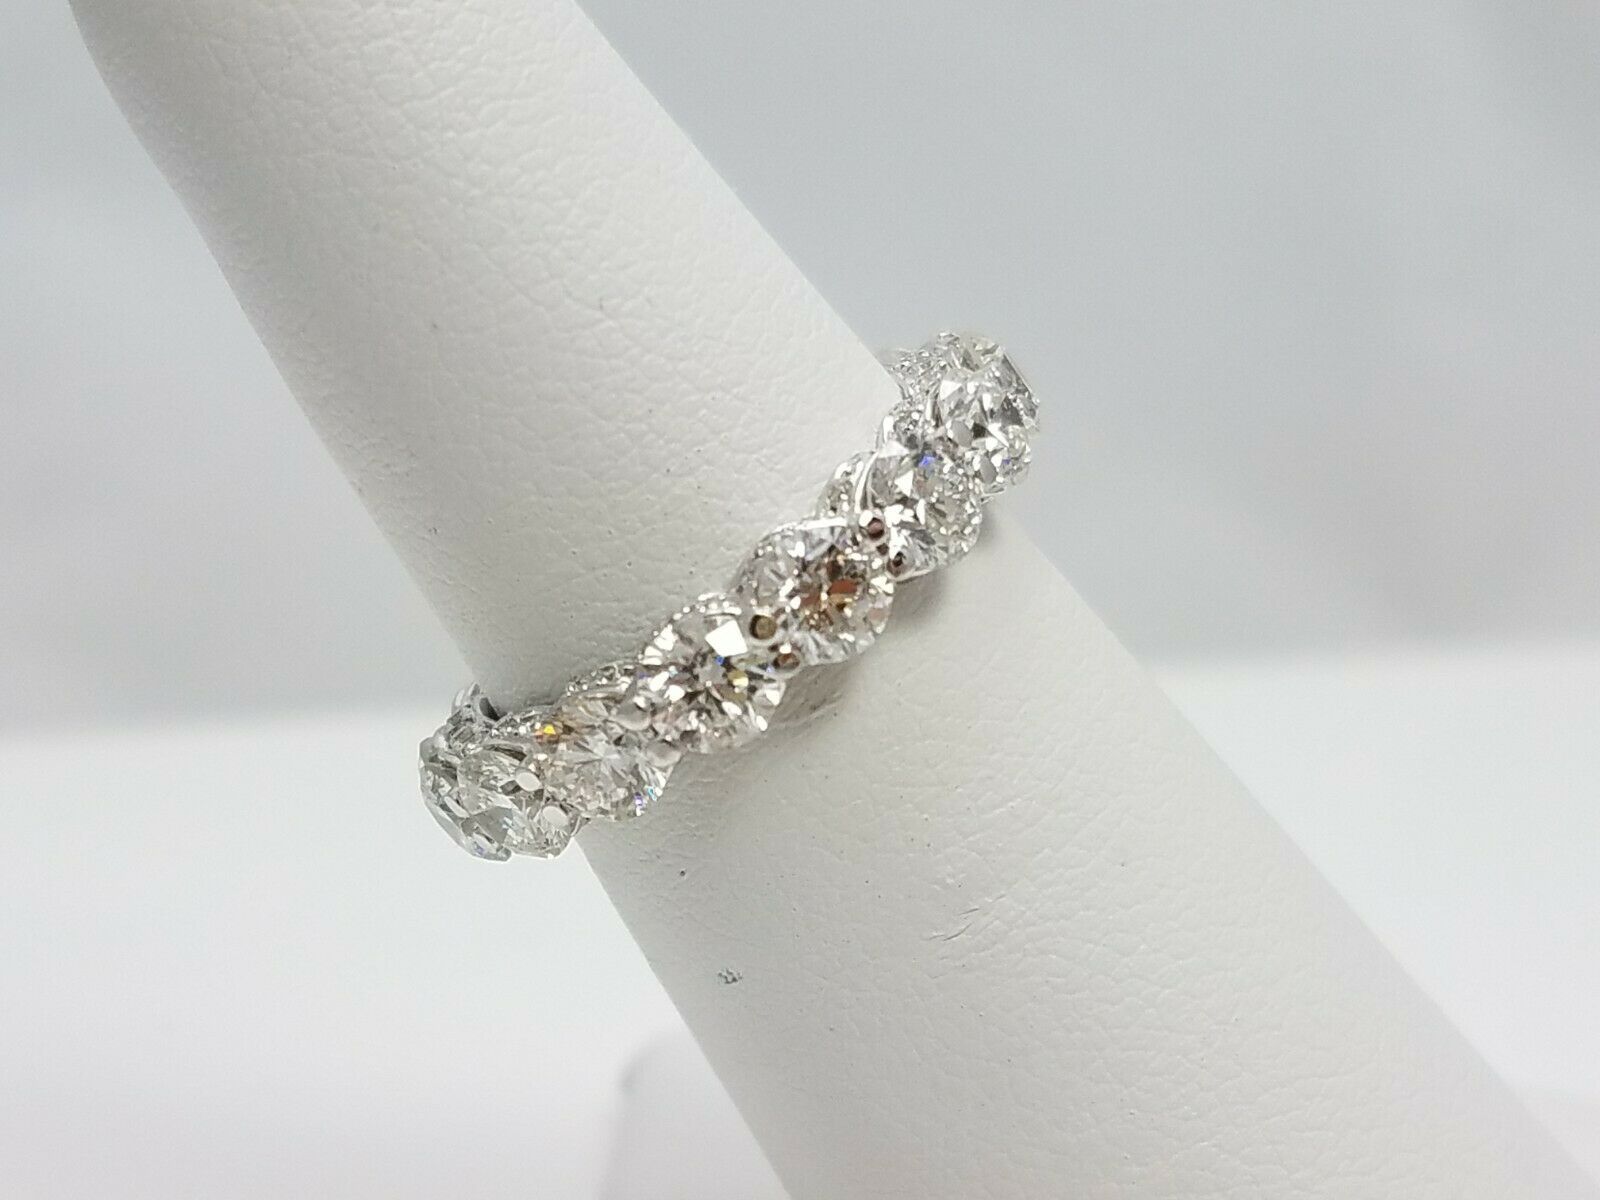 New! 4.25ctw Natural Diamond 18k Gold Eternity Ring Band